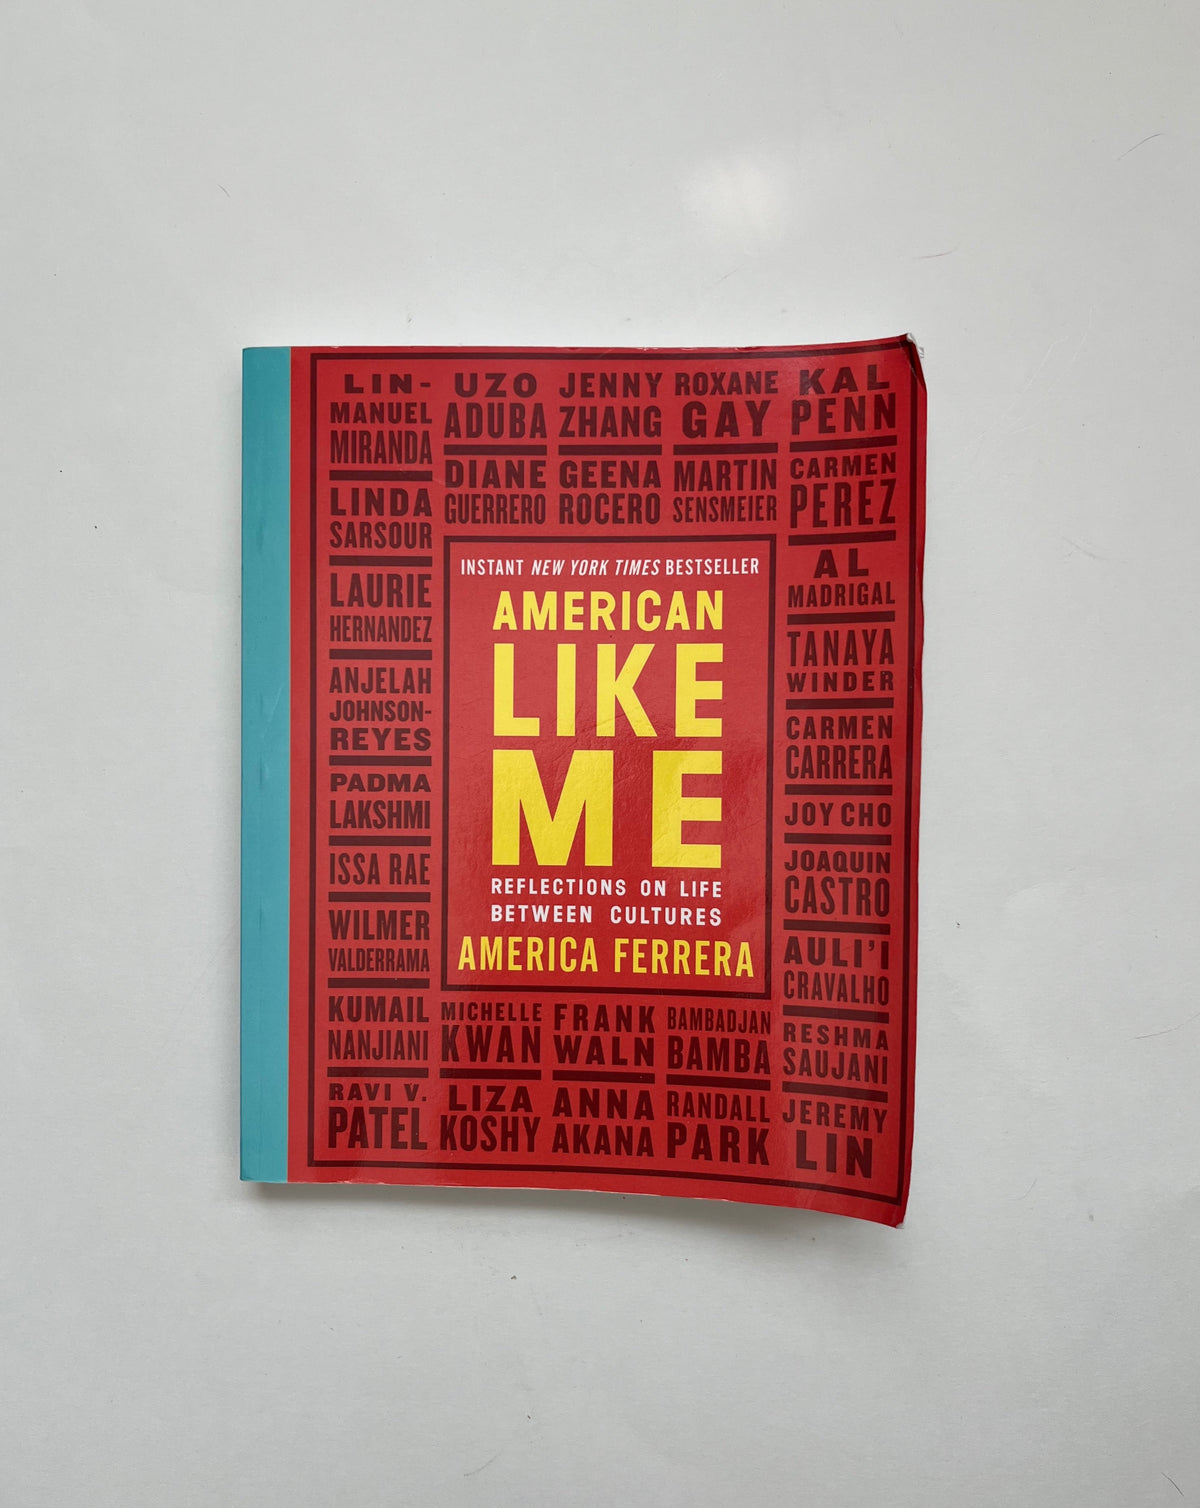 American Like Me: Reflections on Life Between Cultured edited by America Ferrera